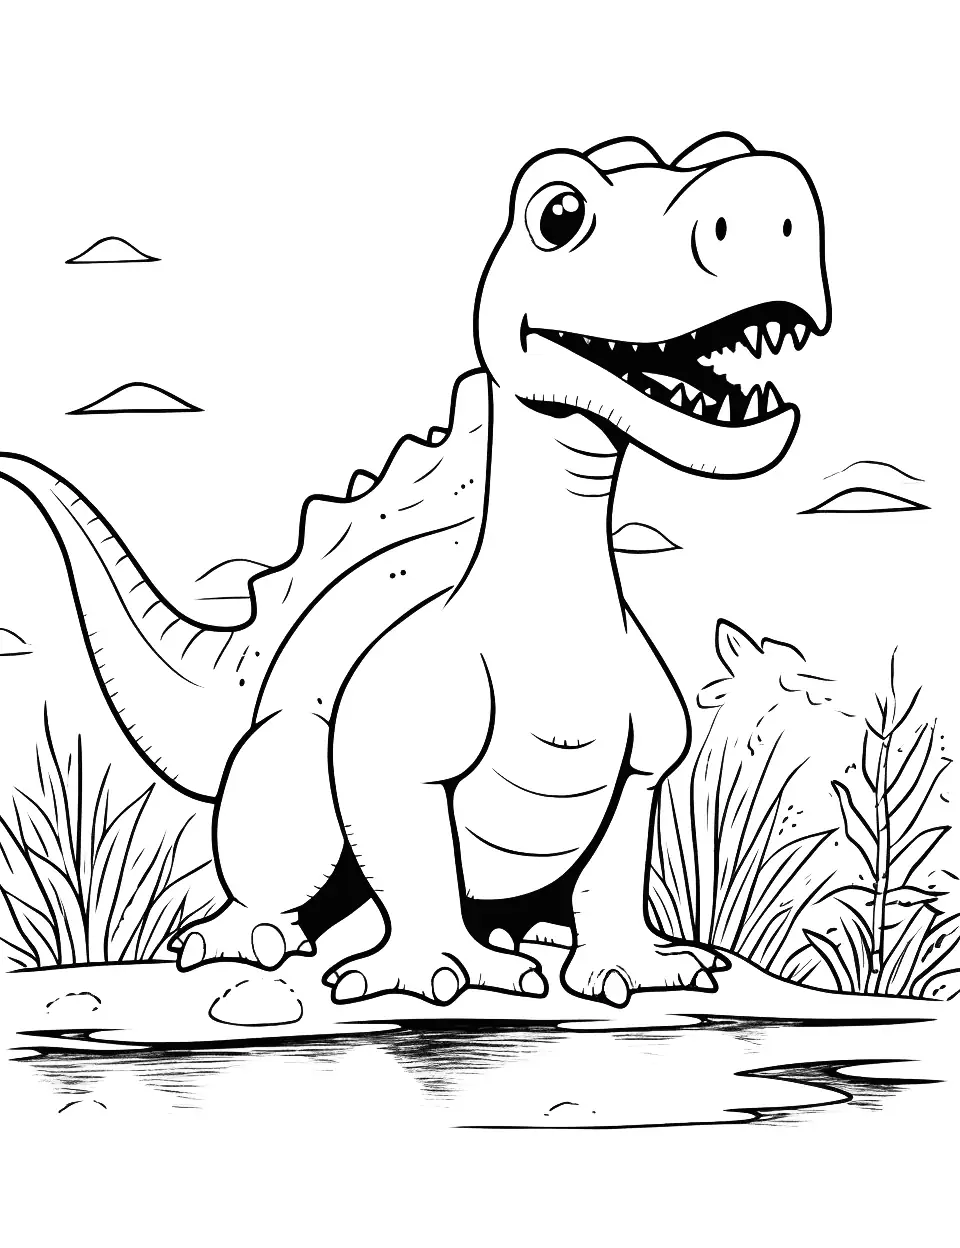 Baryonyx in the Swamp Coloring Page - A Baryonyx hunting for fish in a prehistoric swamp.